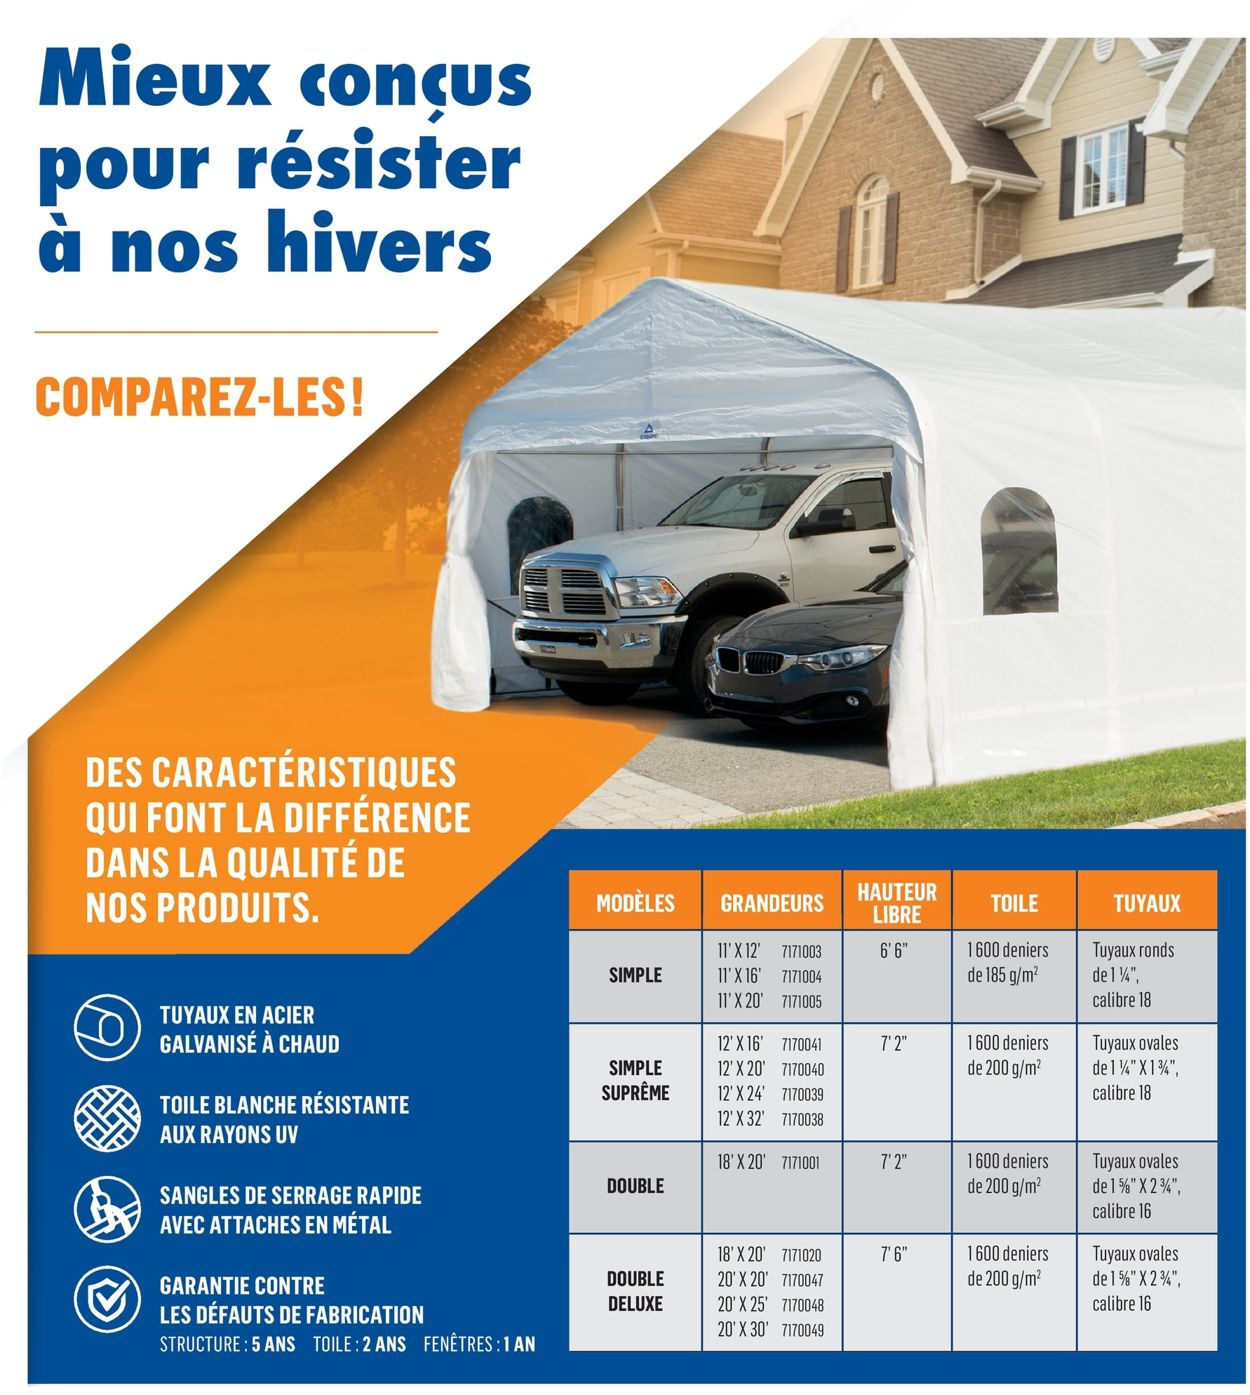 Canac Flyer from 10/03/2019